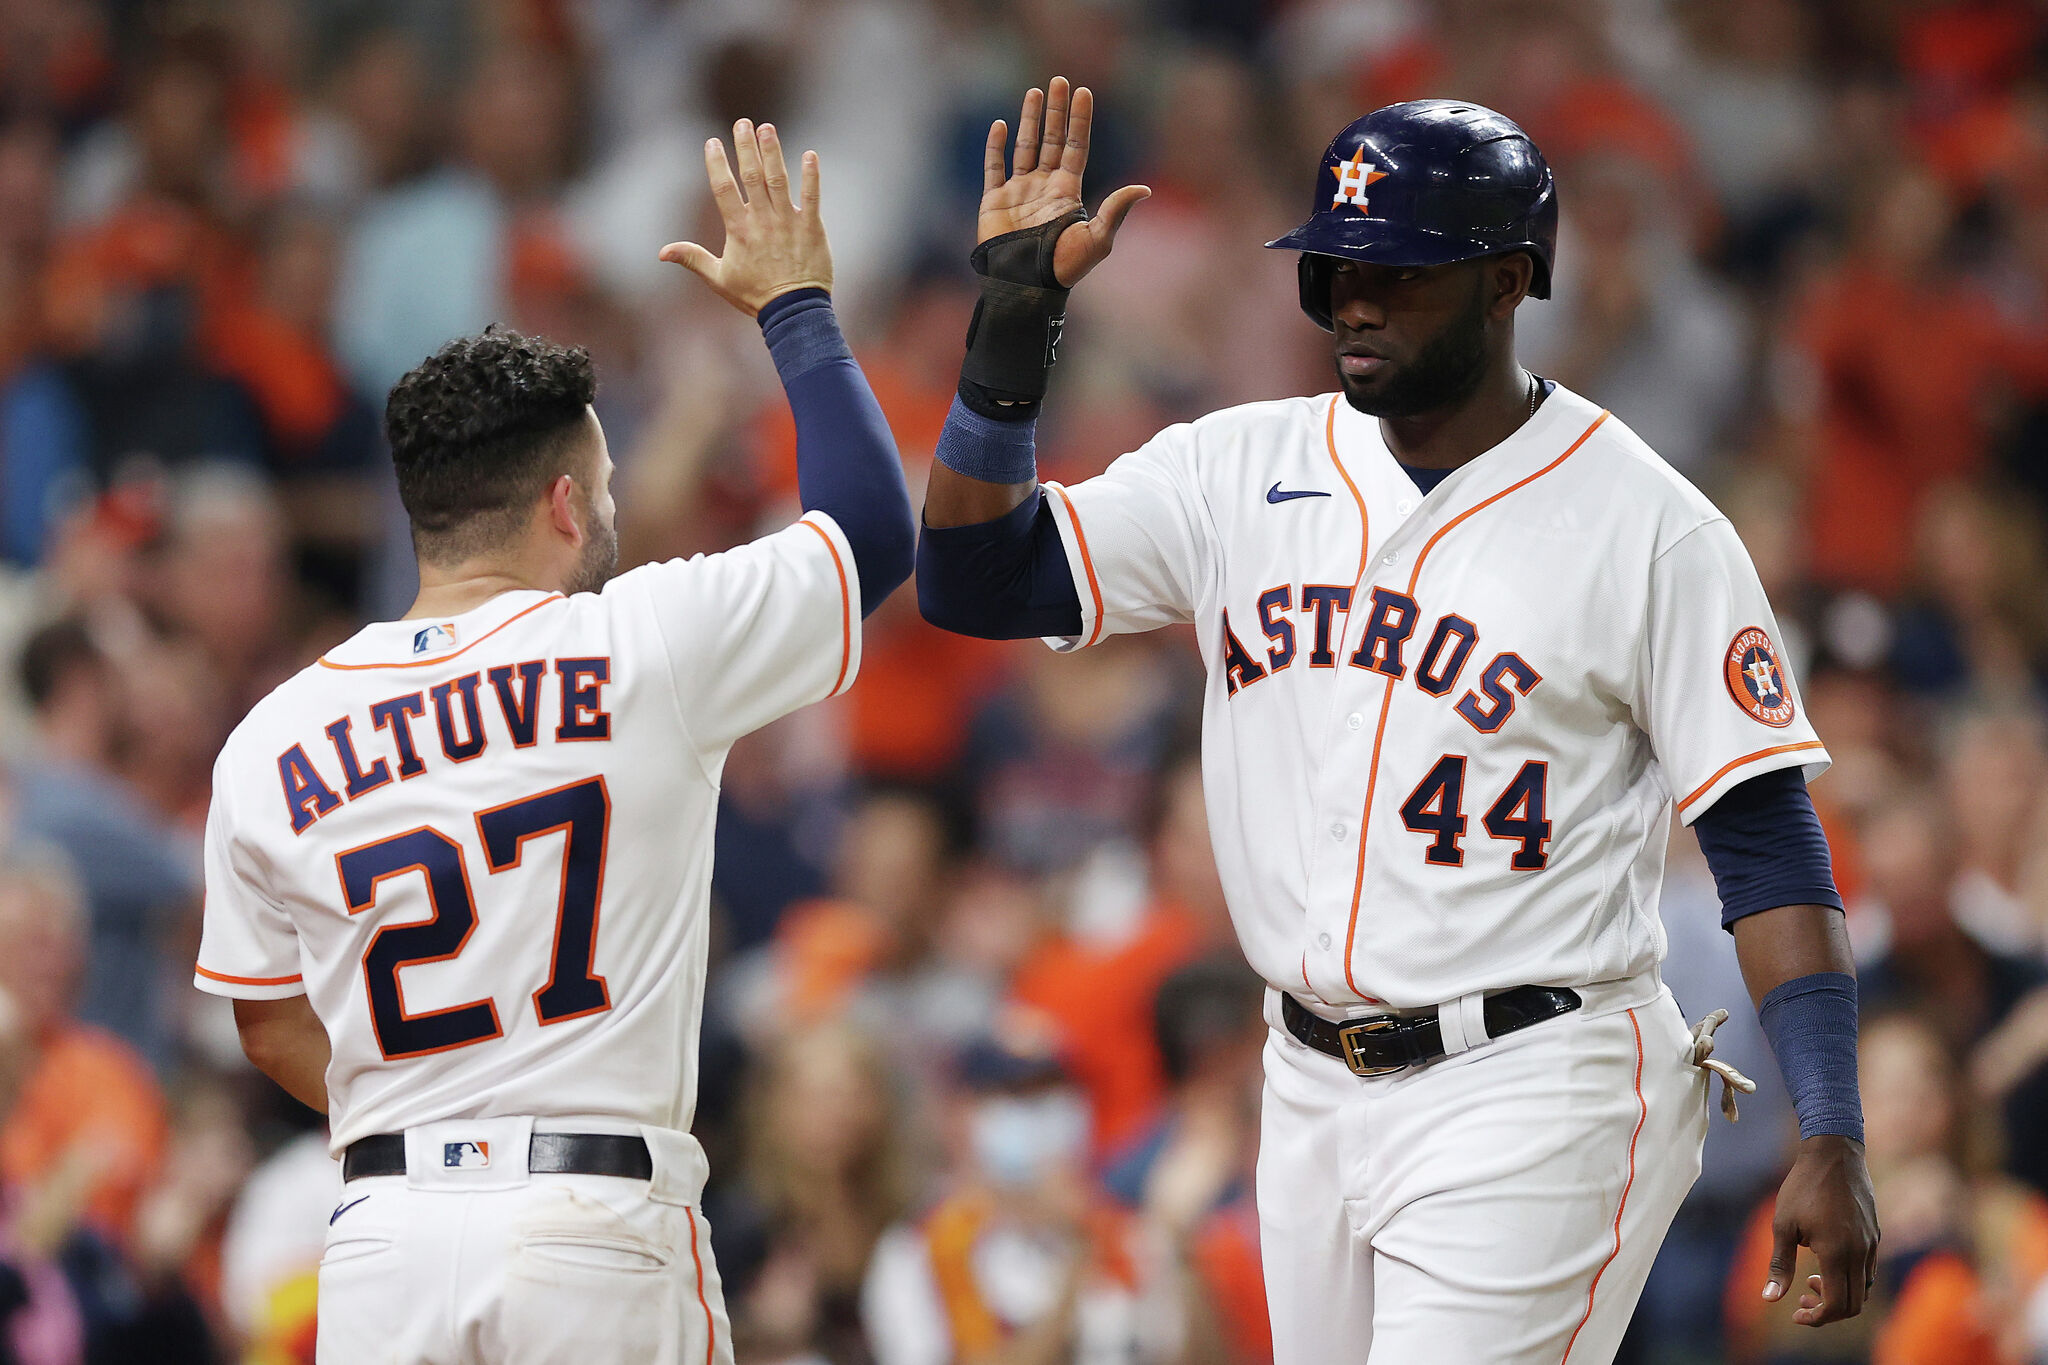 Houston Astros: Jose Altuve could be days away from a return